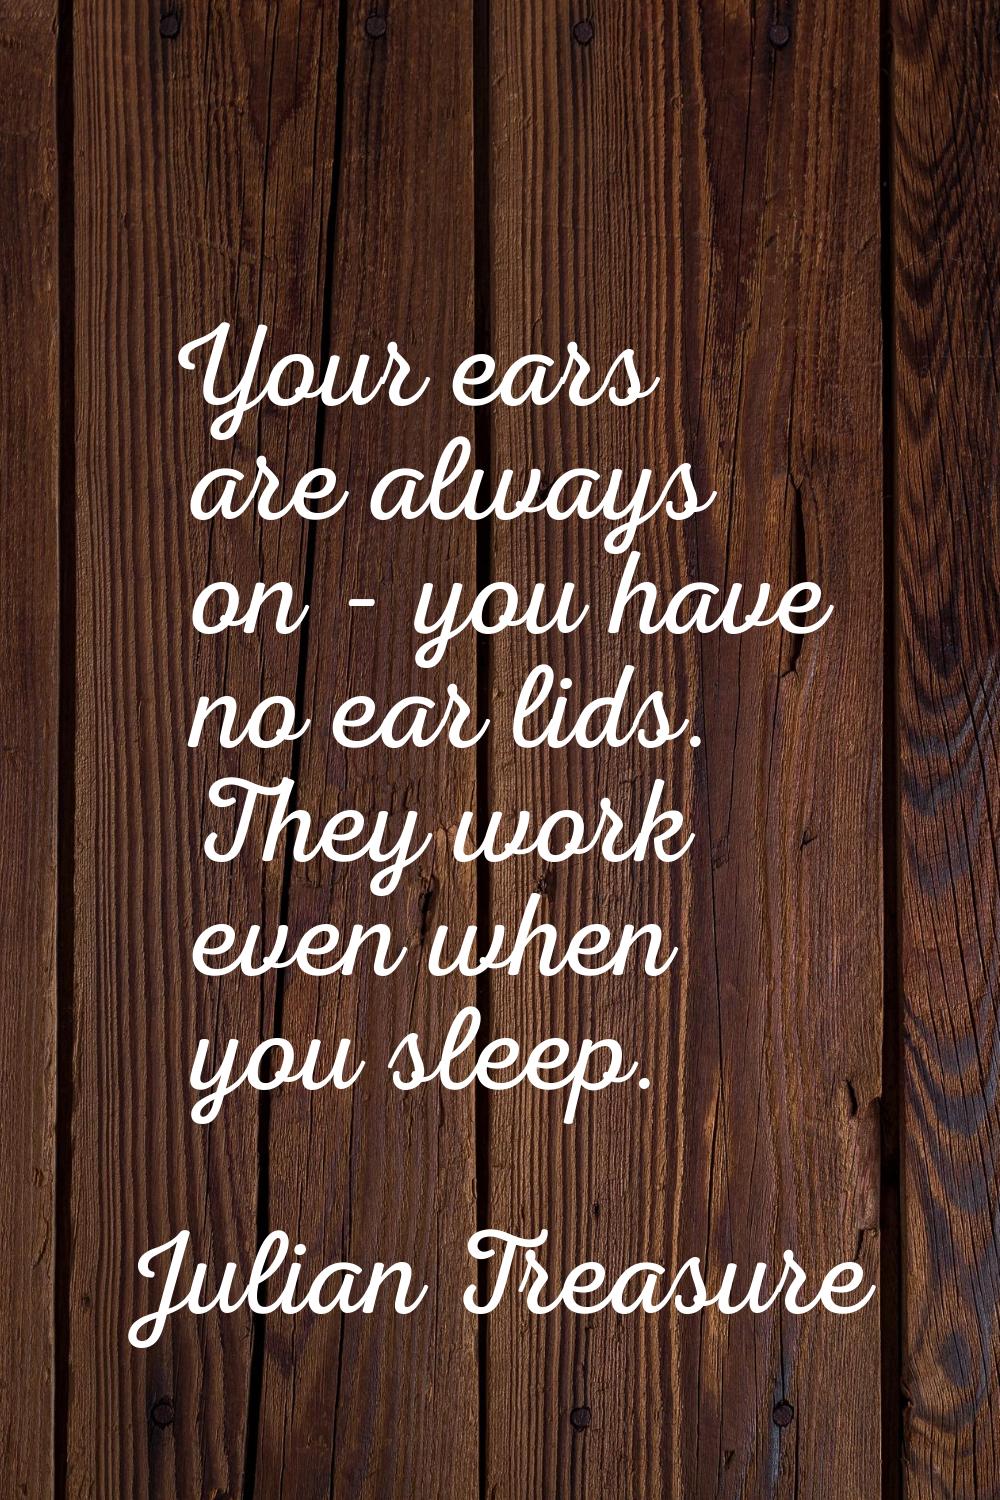 Your ears are always on - you have no ear lids. They work even when you sleep.